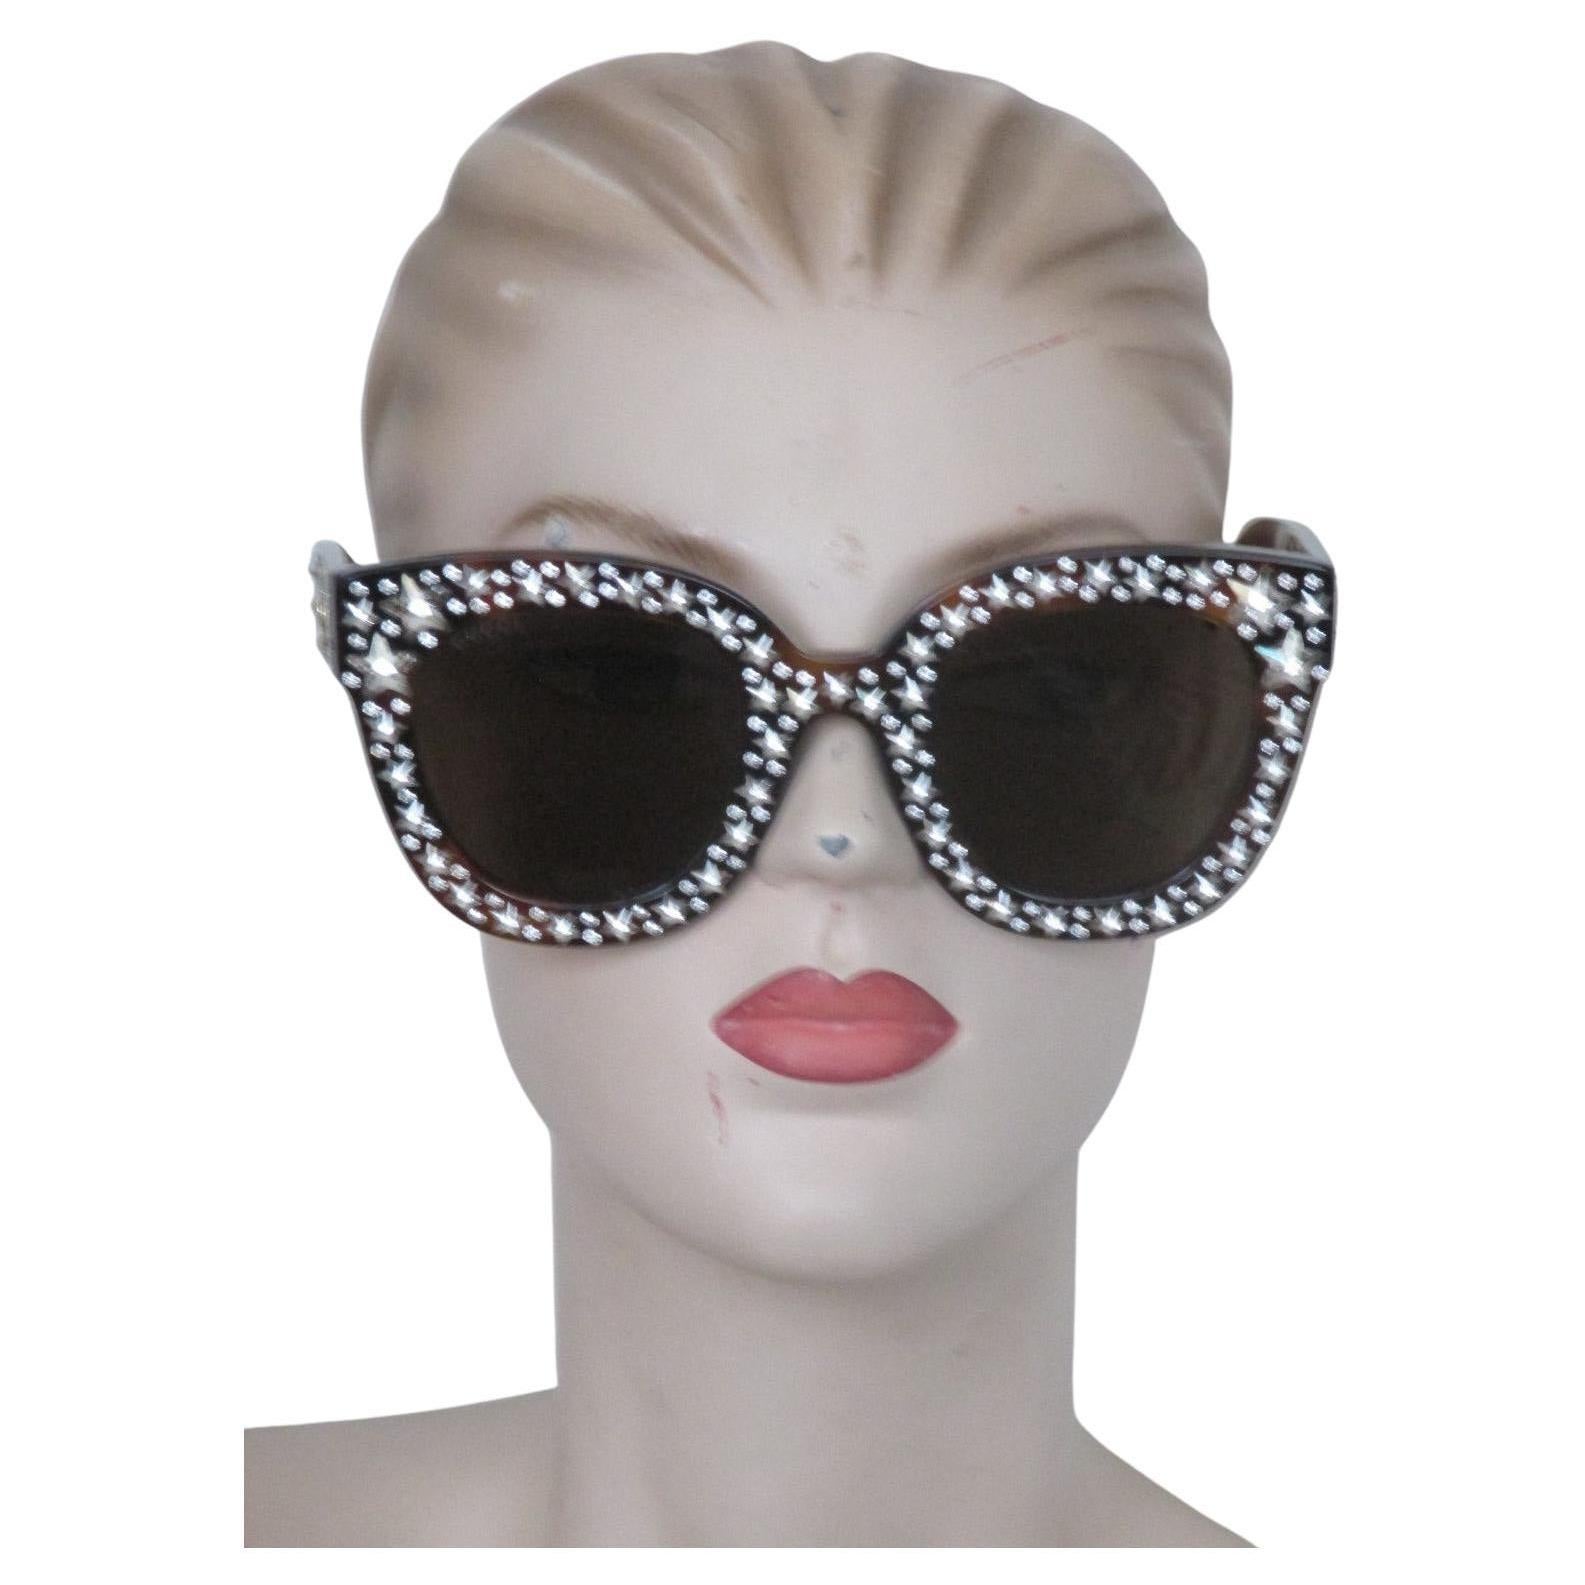 Gucci Cat Eye Sunglasses - 4 For Sale on 1stDibs